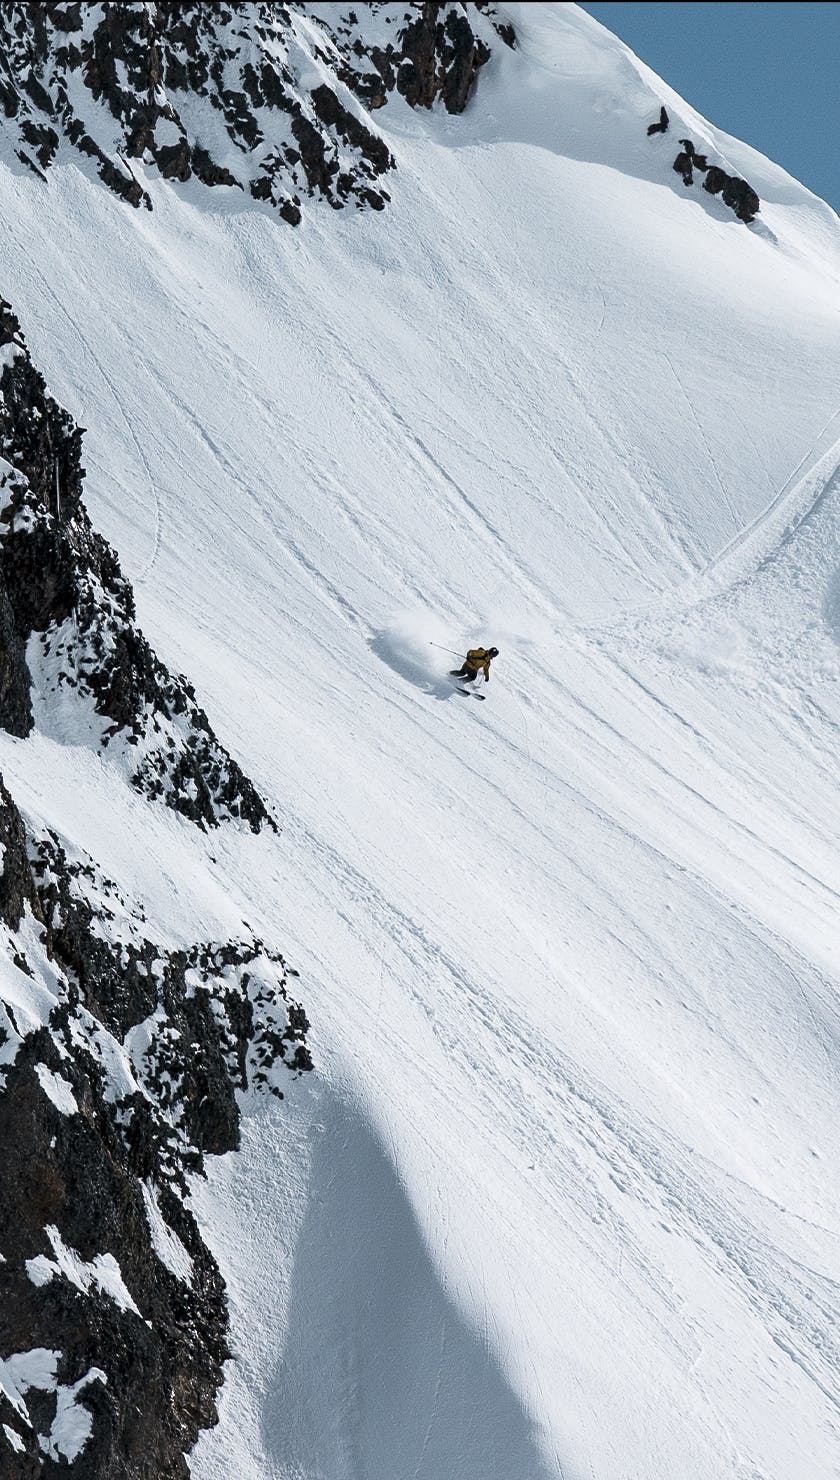 48 Hours in the Coast Range with Tobin Seagel